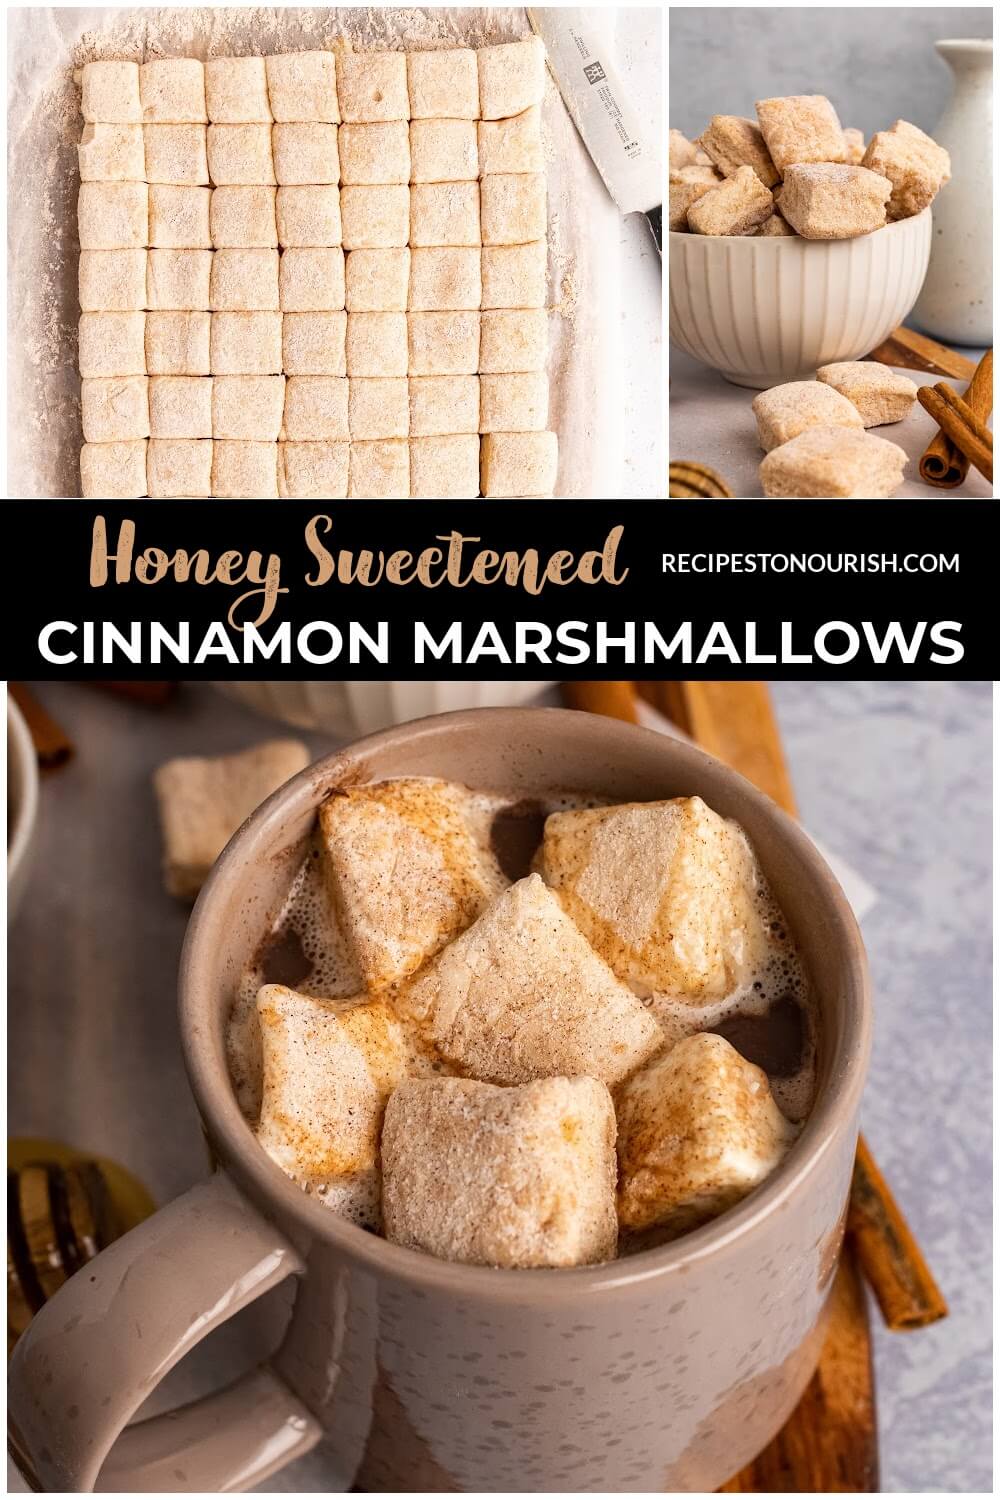 3 individual photos with homemade marshmallows cut into squares, a bowl full of homemade marshmallows sitting next to cinnamon sticks and a honey dipper with honey, a mug full of hot chocolate topped with homemade marshmallows sitting next to cinnamon sticks and a honey dipper with honey, and text that says Honey Sweetened Cinnamon Marshmallows.